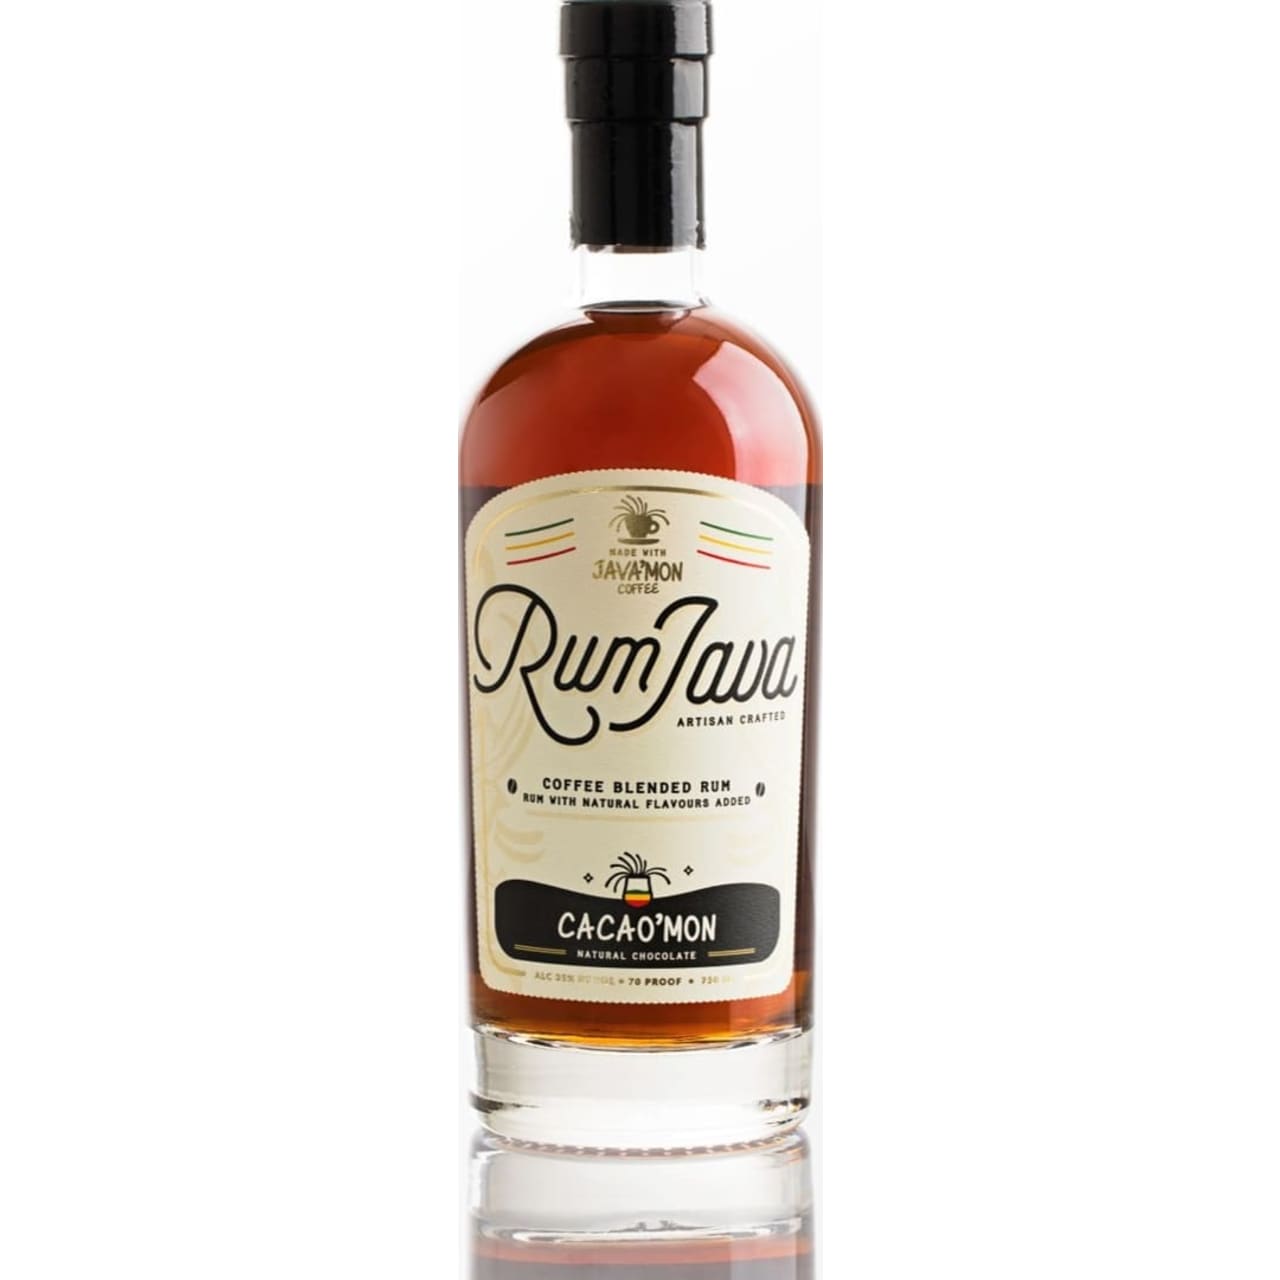 RumJava CacaoMon is Chocolate Coffee Rum infused with a blend of beans from Brazil and Colombia which are roasted in chocolate, red wine, and spice.